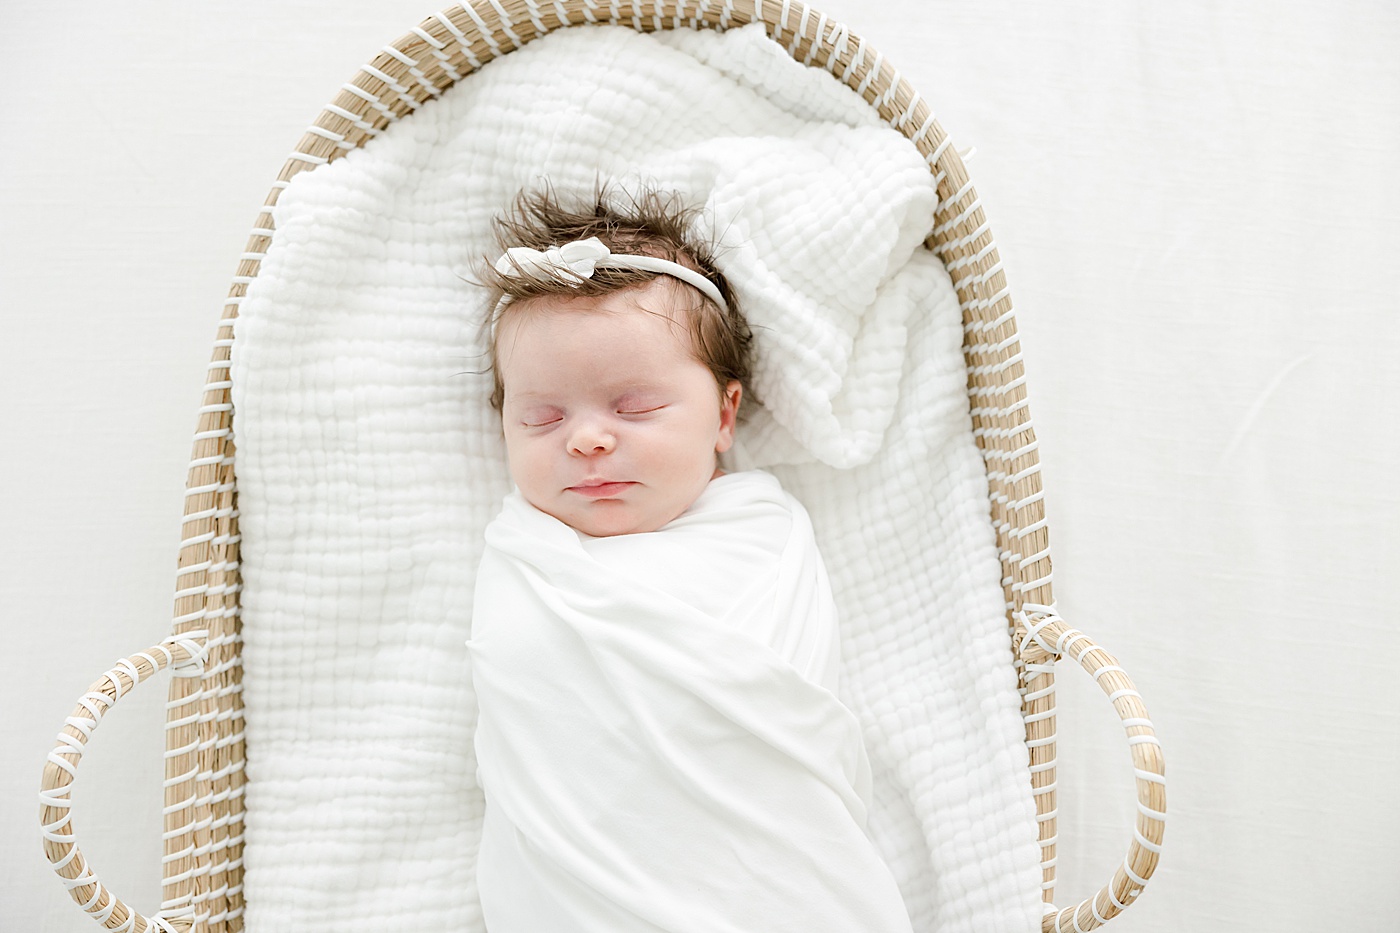 Baby swaddled in Moses basket for newborn photos | Kristin Wood Photography